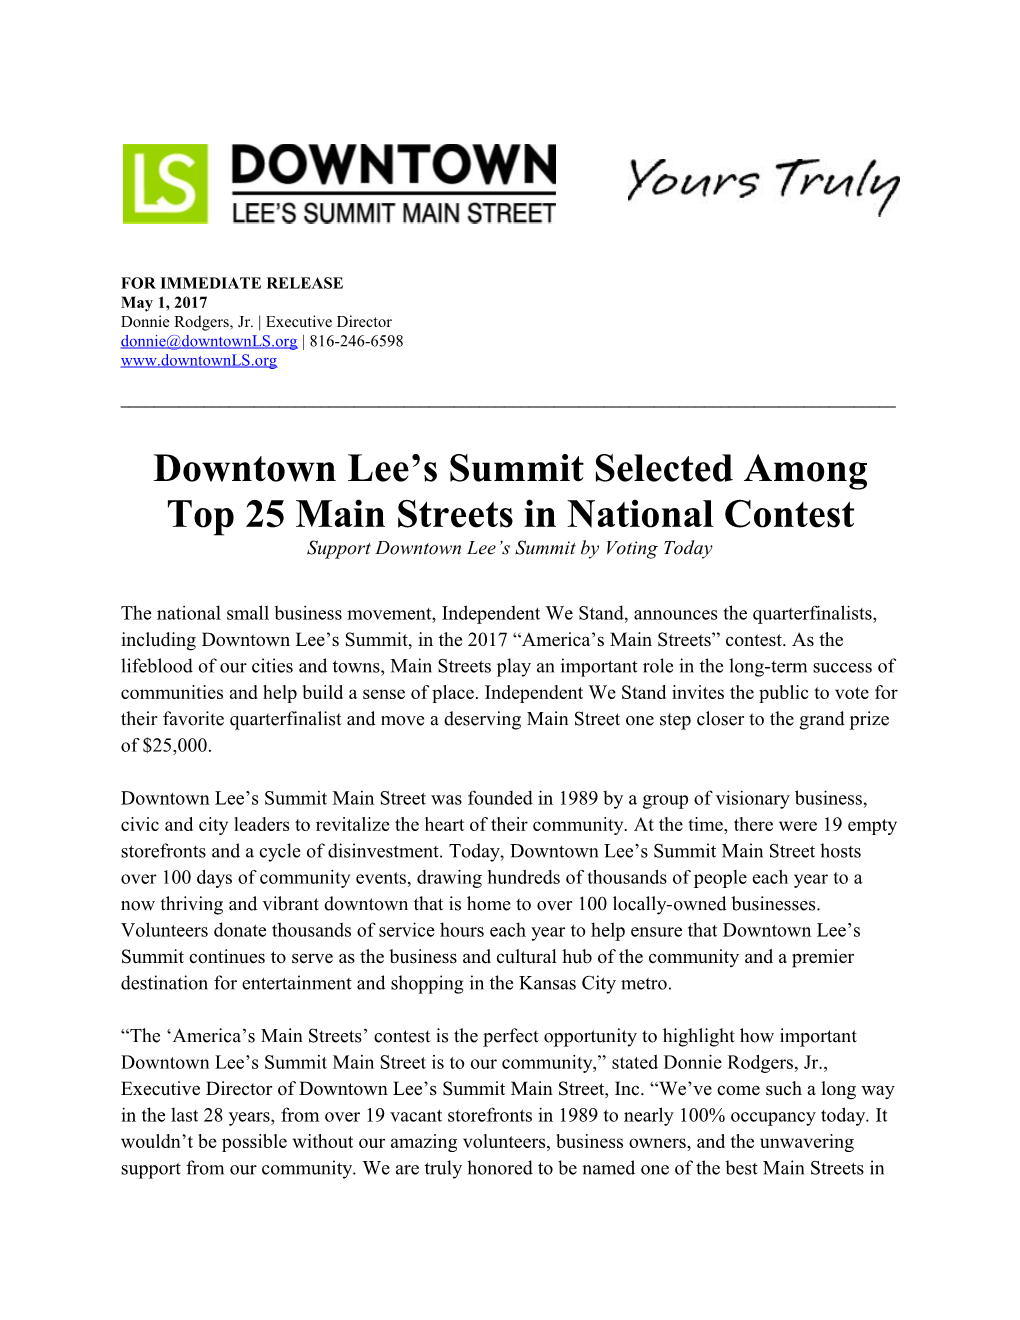 Downtown Lee S Summit Selected Among Top 25 Main Streets in National Contest